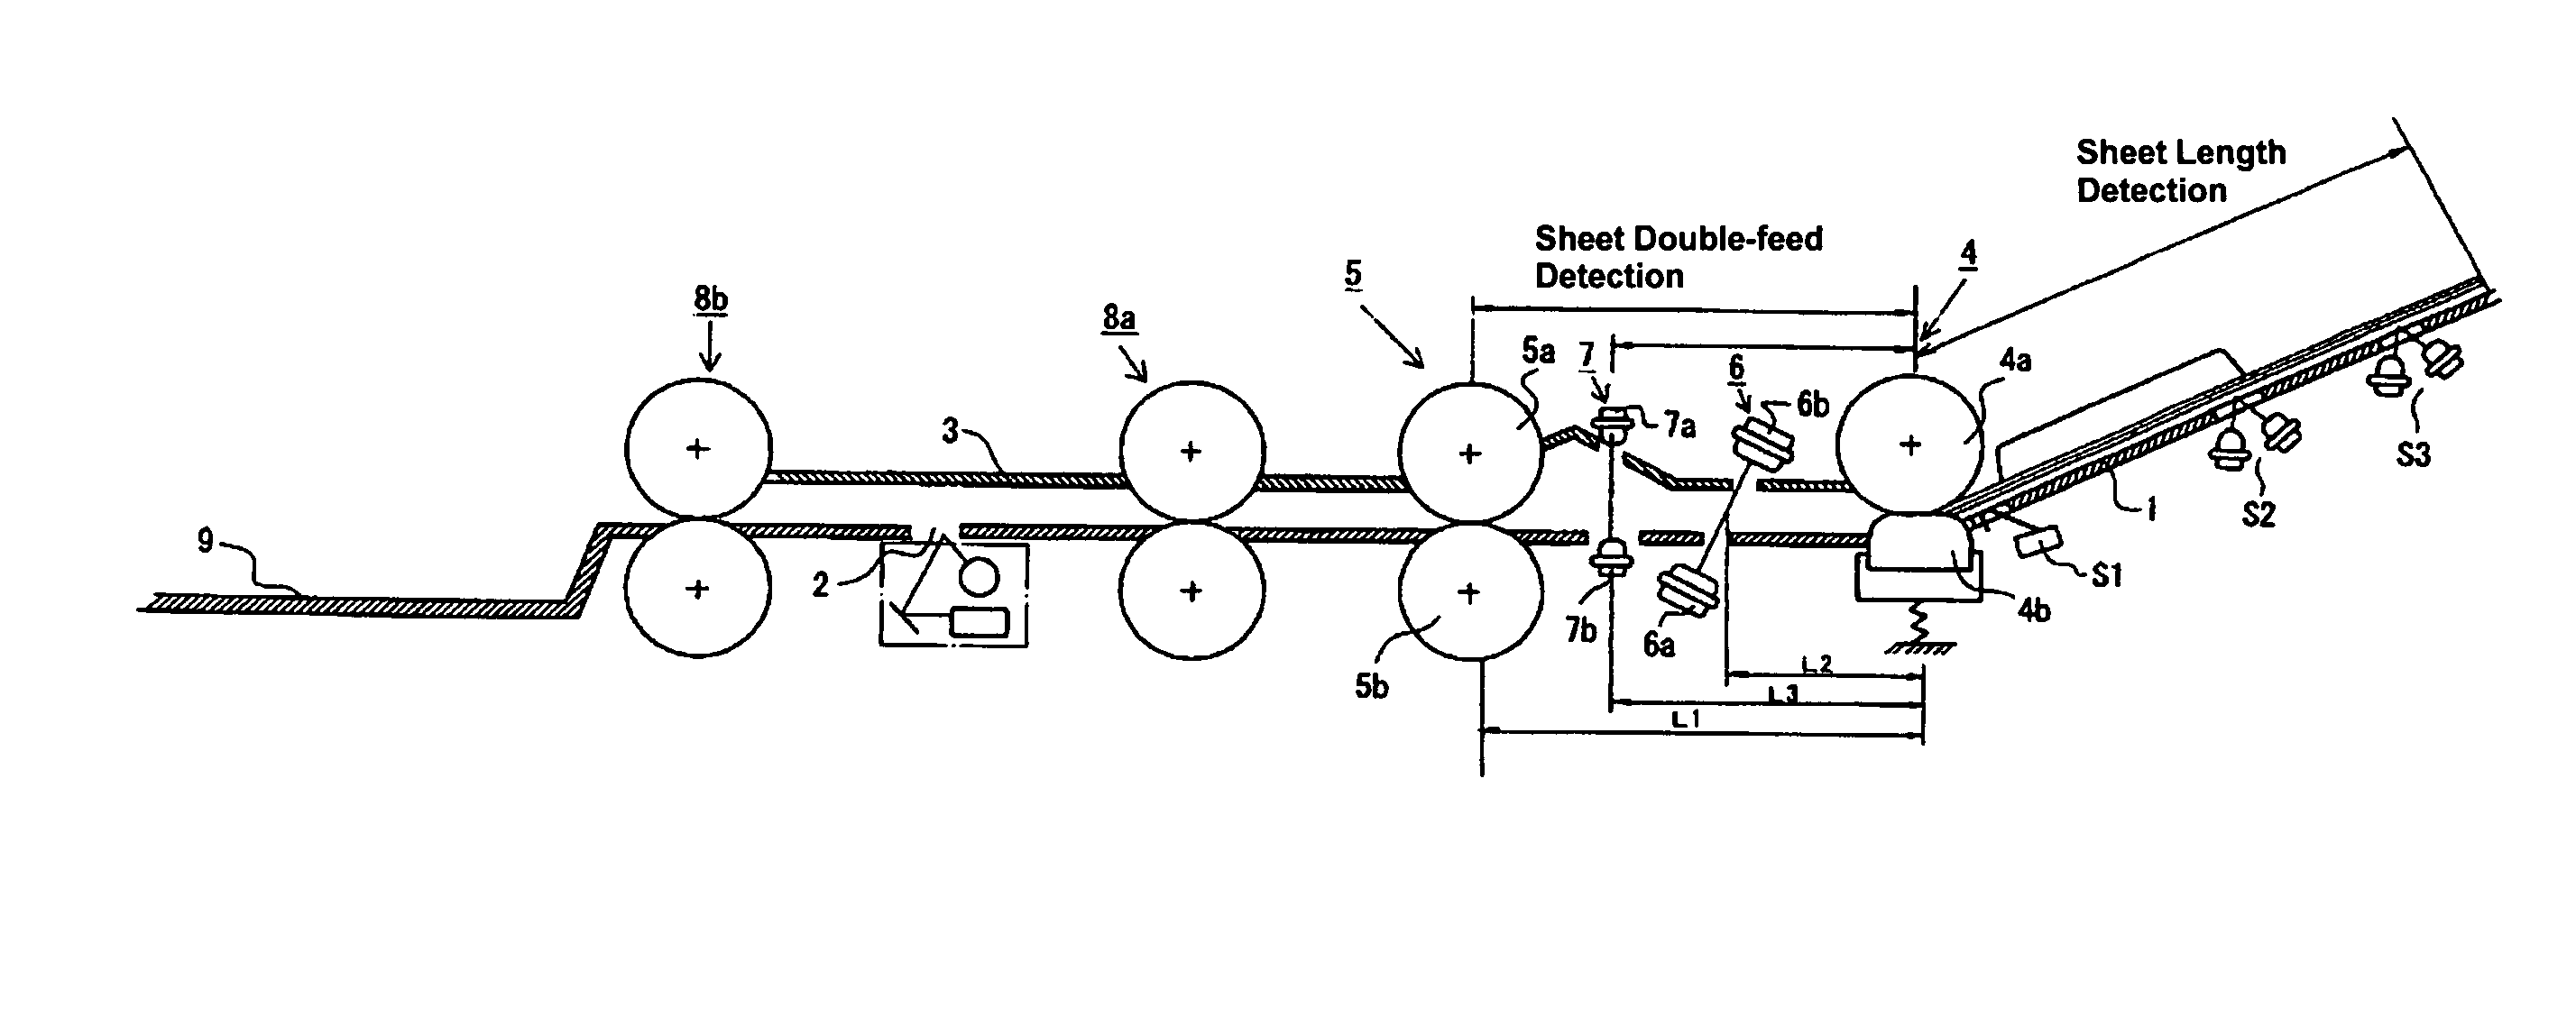 Sheet feeding apparatus and method of detecting double feed